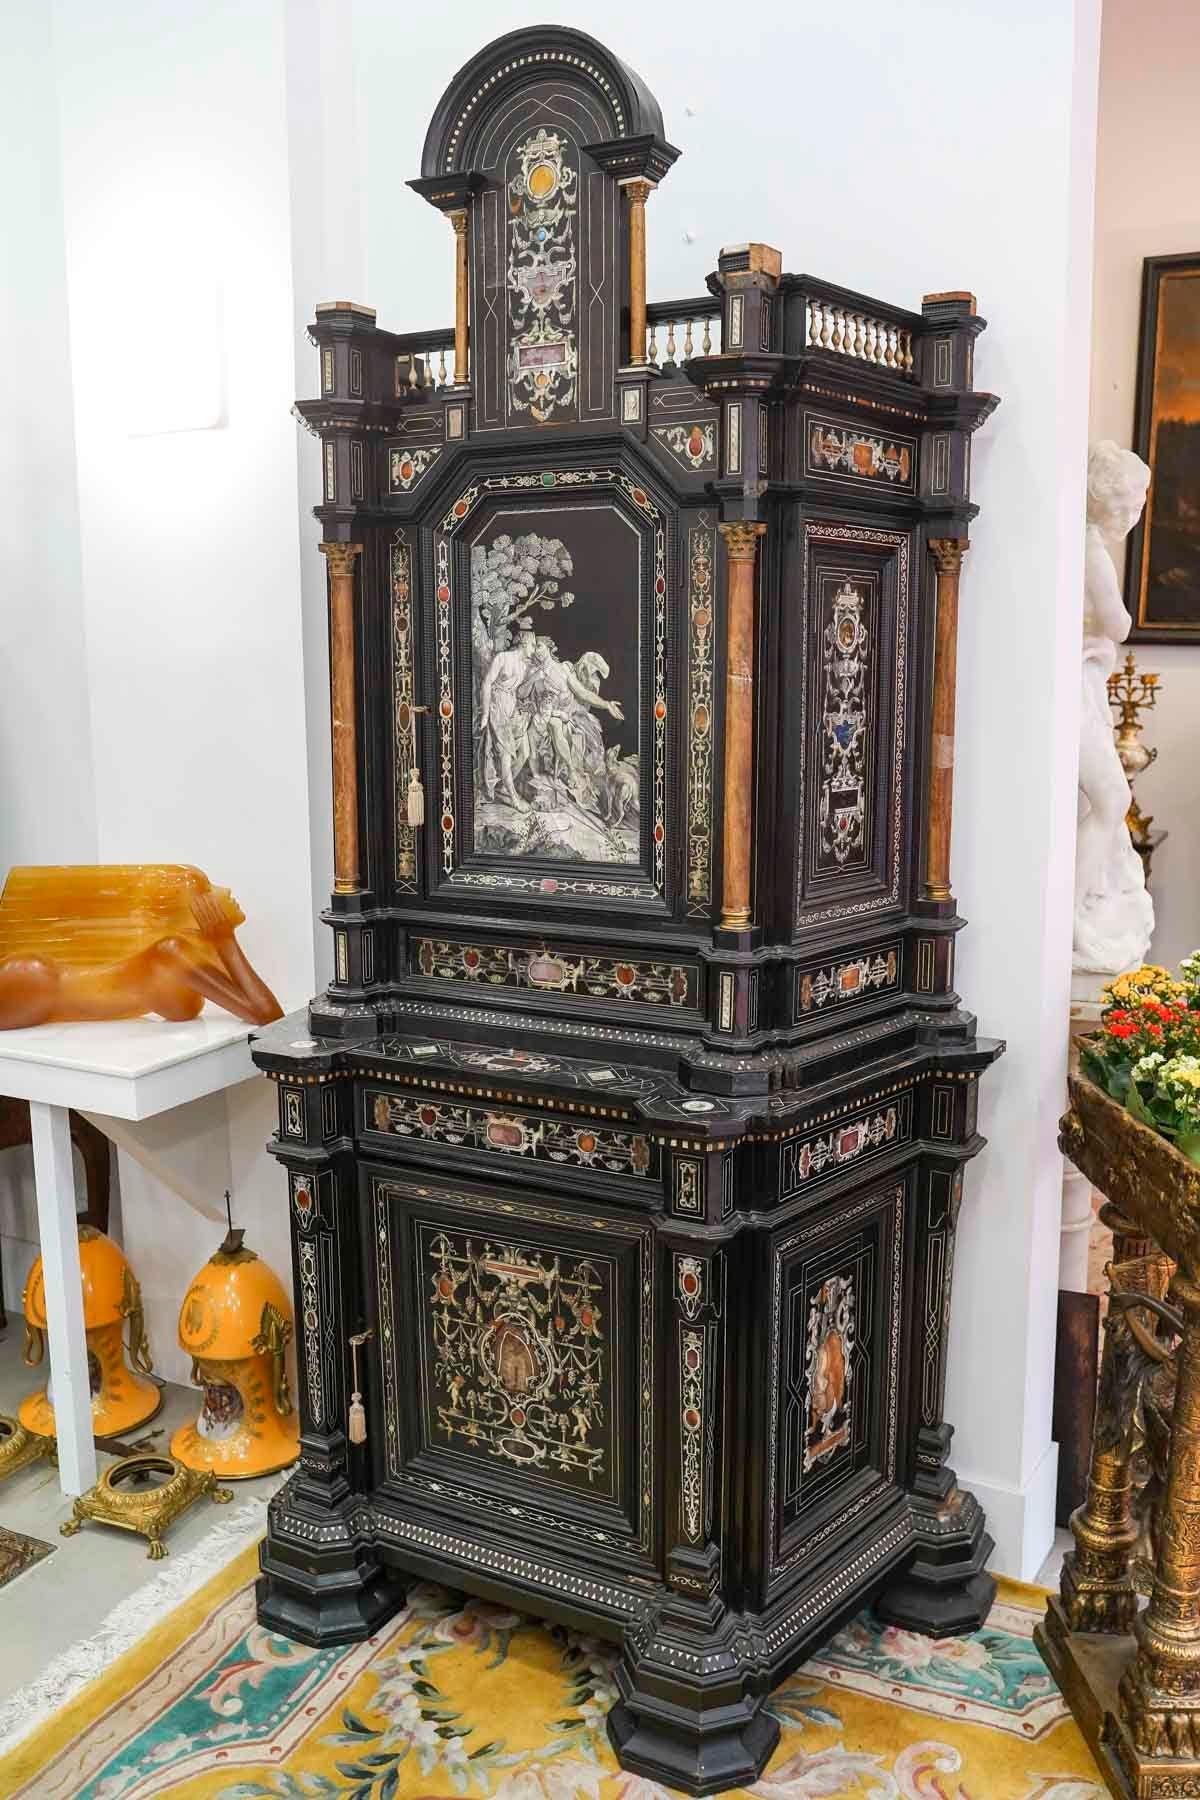 Neoclassical 18th Century Italian Cabinet in Ebony, Ivory, Hard Stone Inlay, Secret Drawers. For Sale